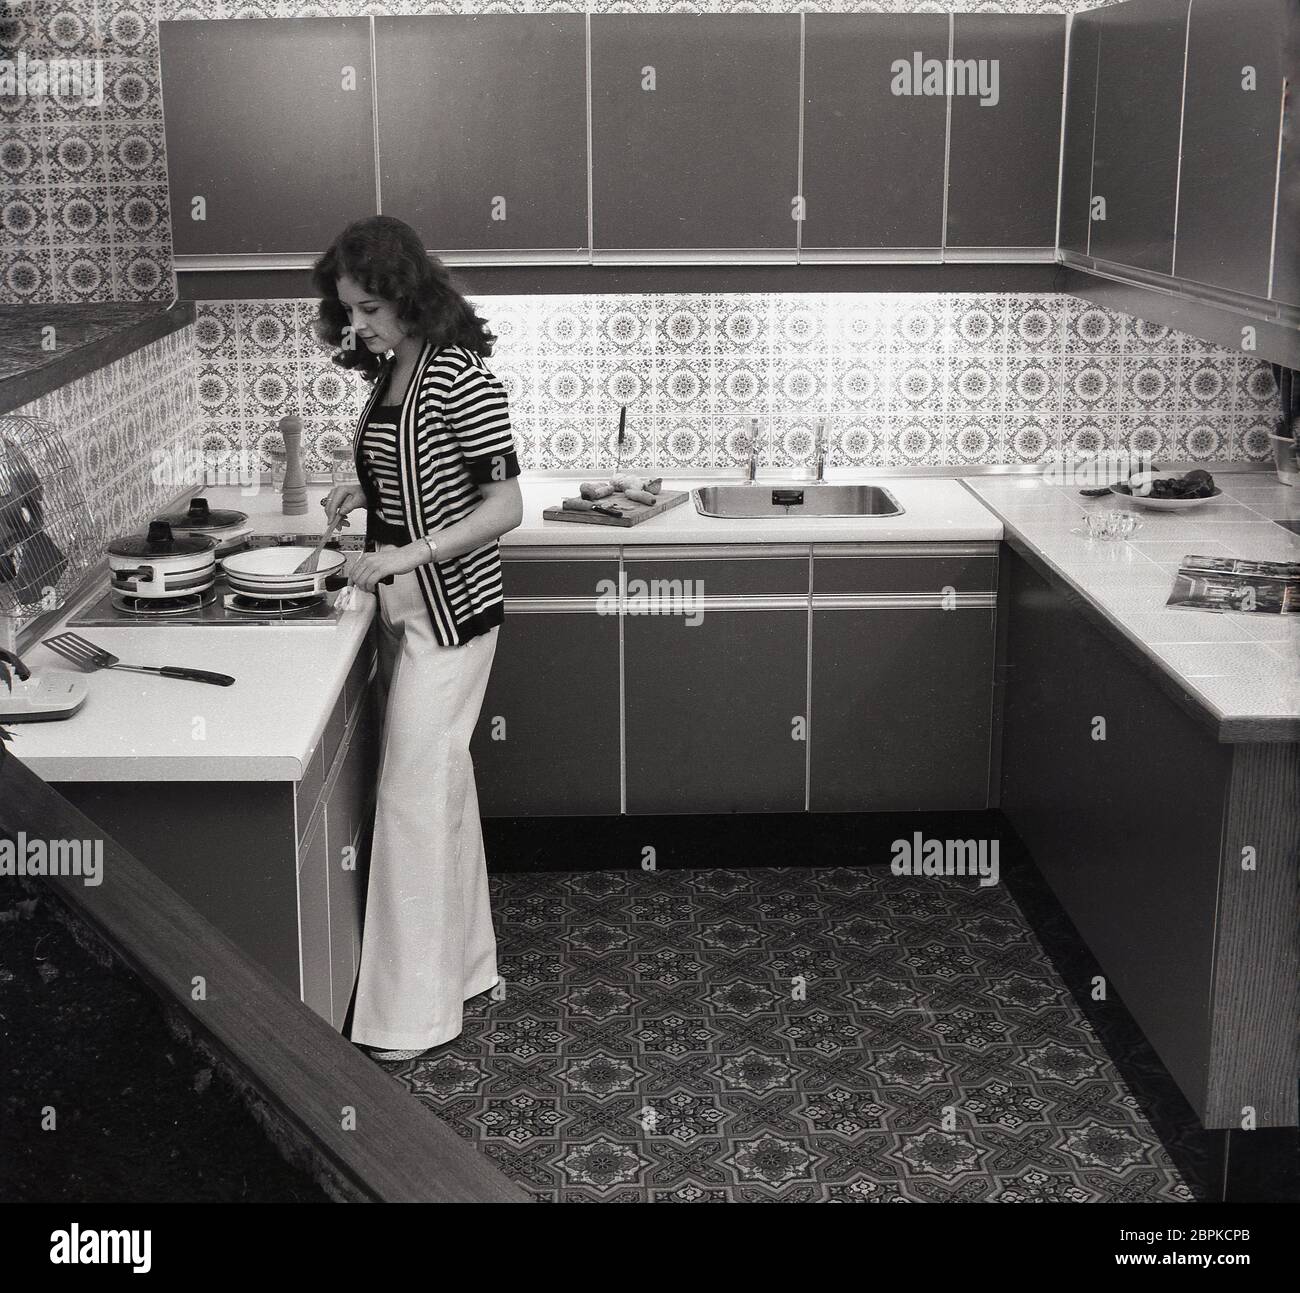 1970s, an elegant, stylish looking lady in a stripy top and flared trousers cooking in a compact modern kitchen of the era, with laminate kitchen units and countertops, patterned splashbacks and floor, England, UK. Stock Photo